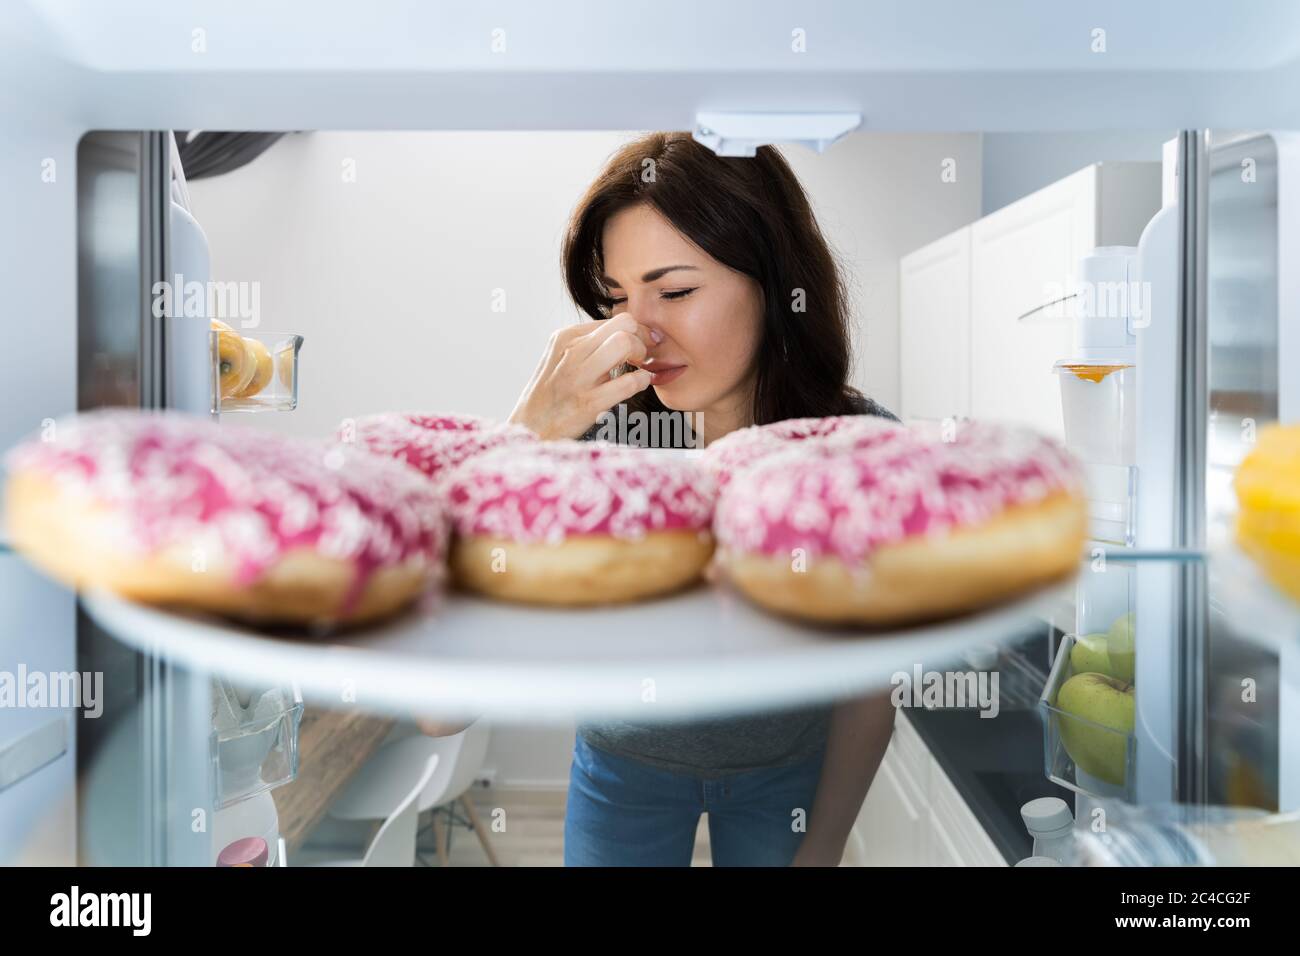 Bad Smell In Fridge. Rotten Food In Refrigerator Stock Photo